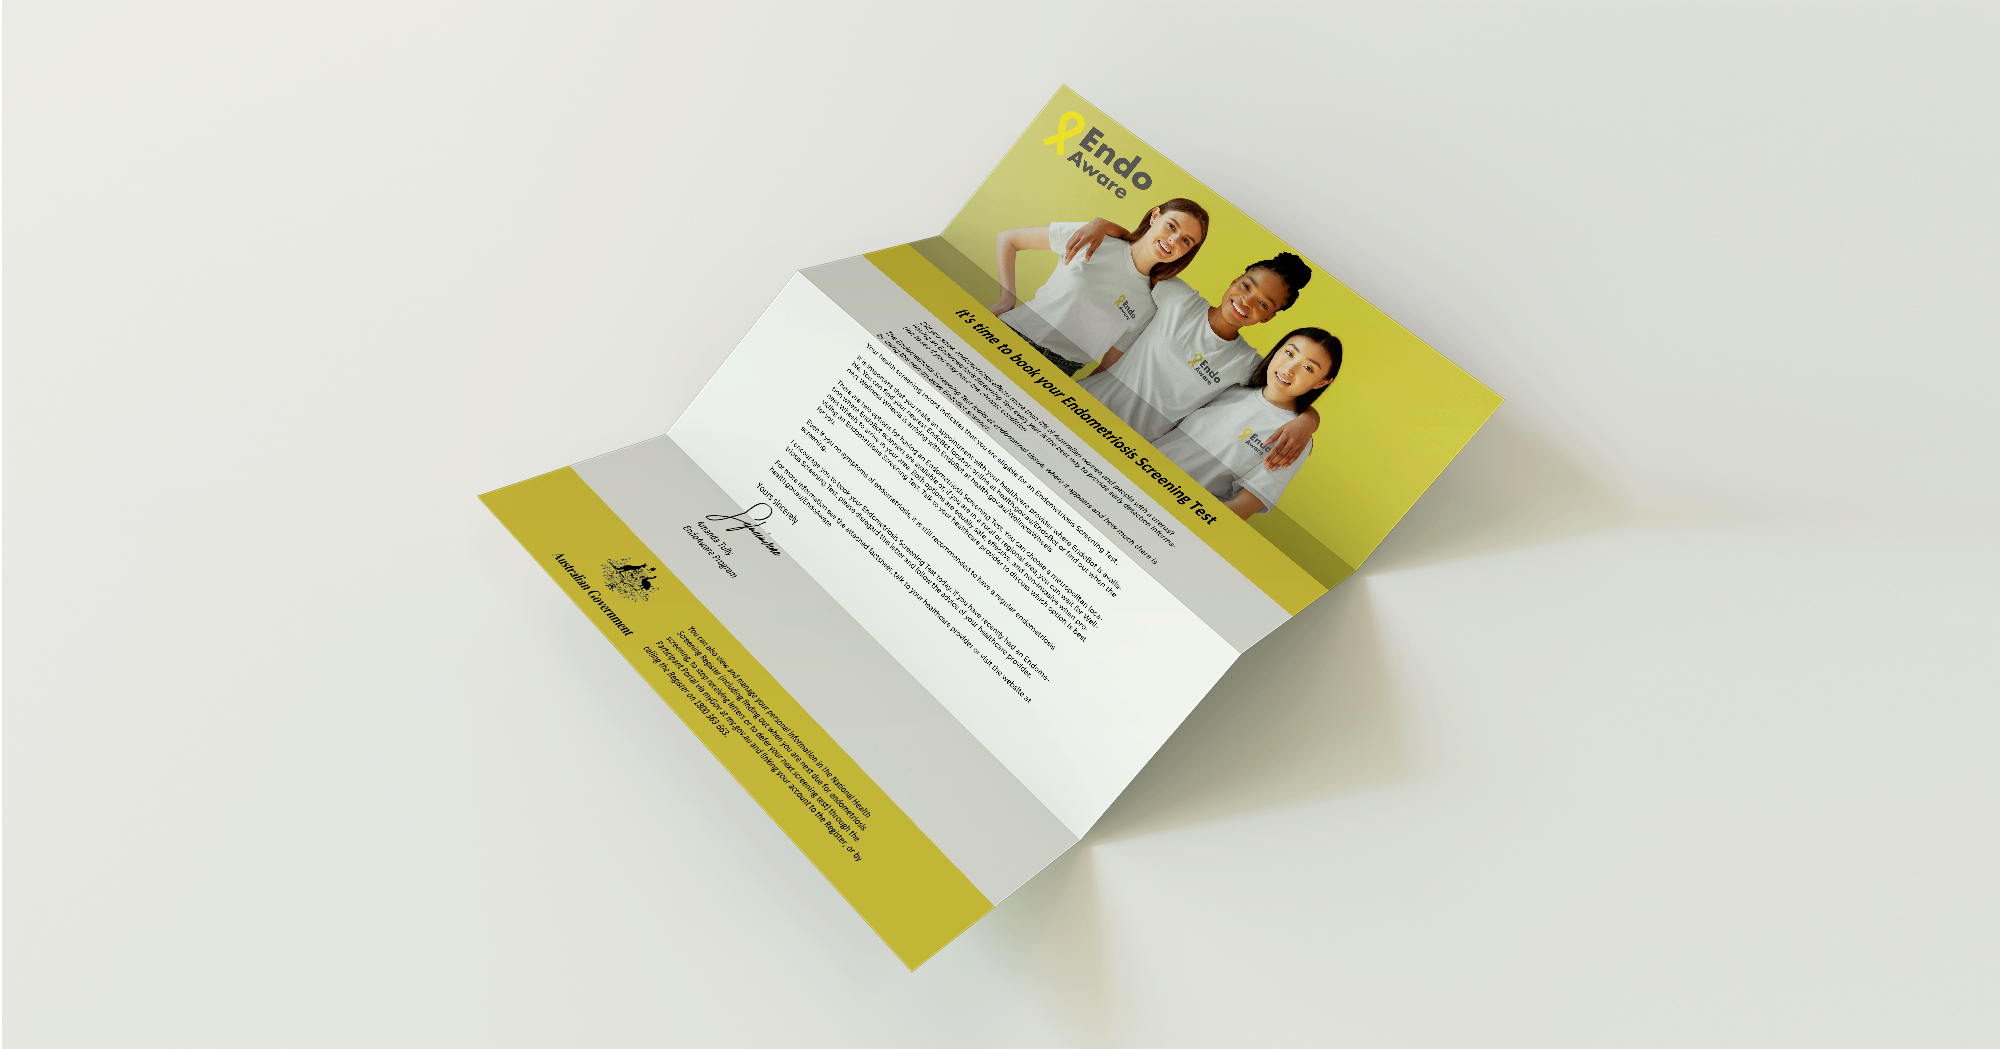 Tri-fold letter with yellow EndoAware branding.